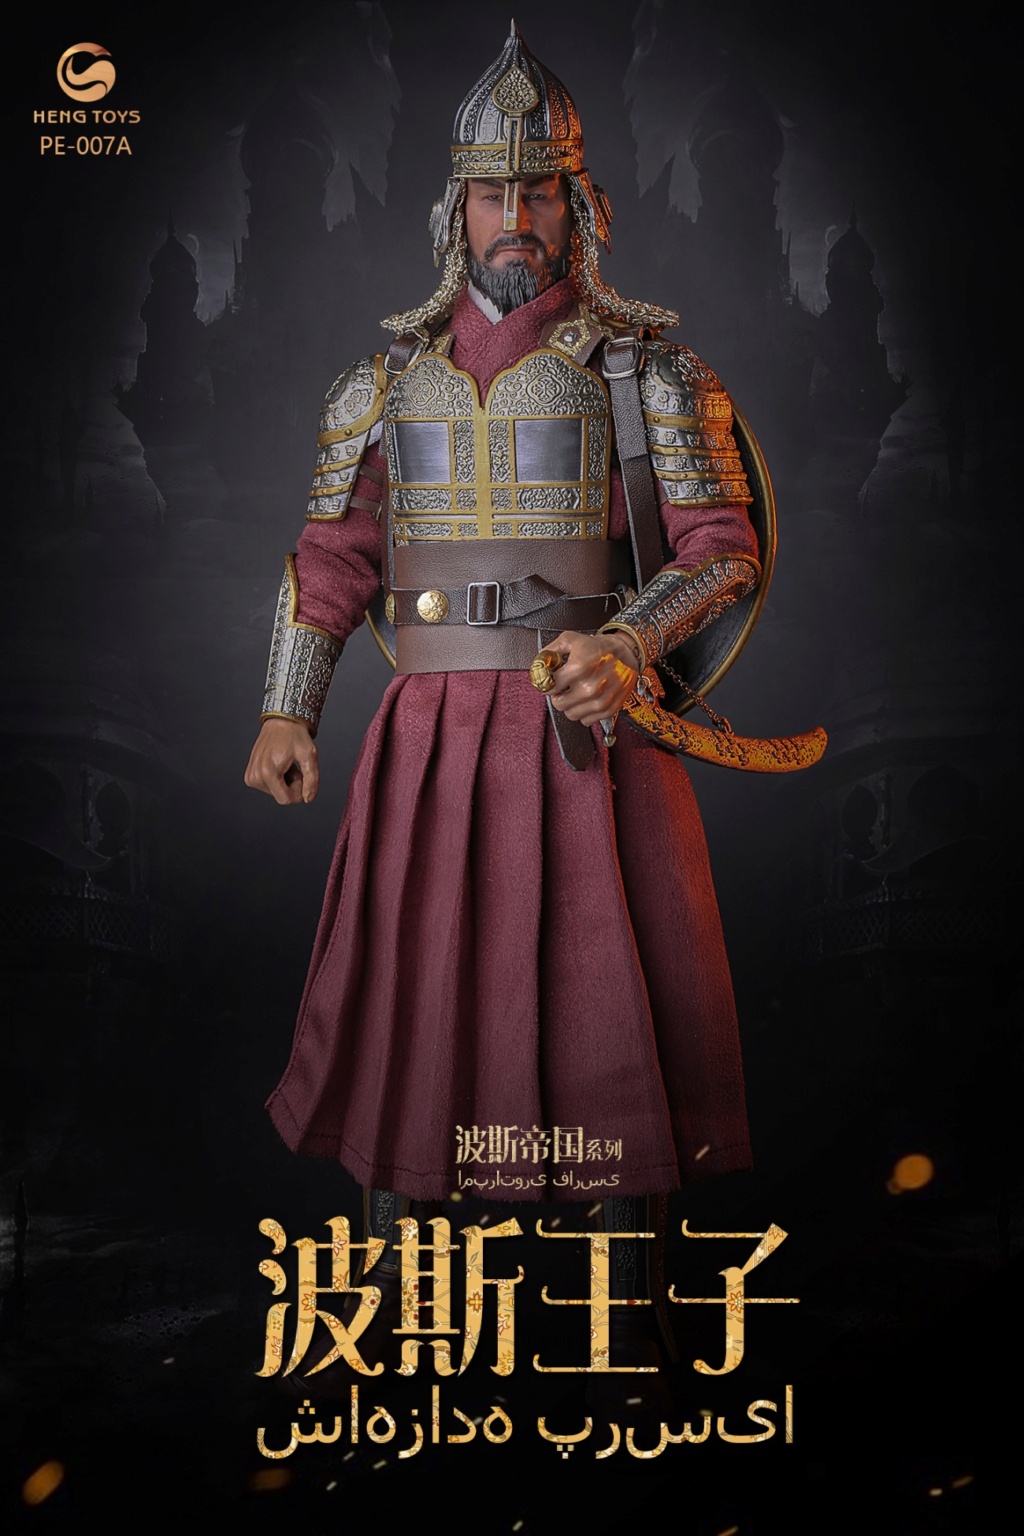 HengToys - NEW PRODUCT: HengToys: 1/6 Persian Empire Series-Prince of Persia [A & B Section] (#PE-007) 16032411